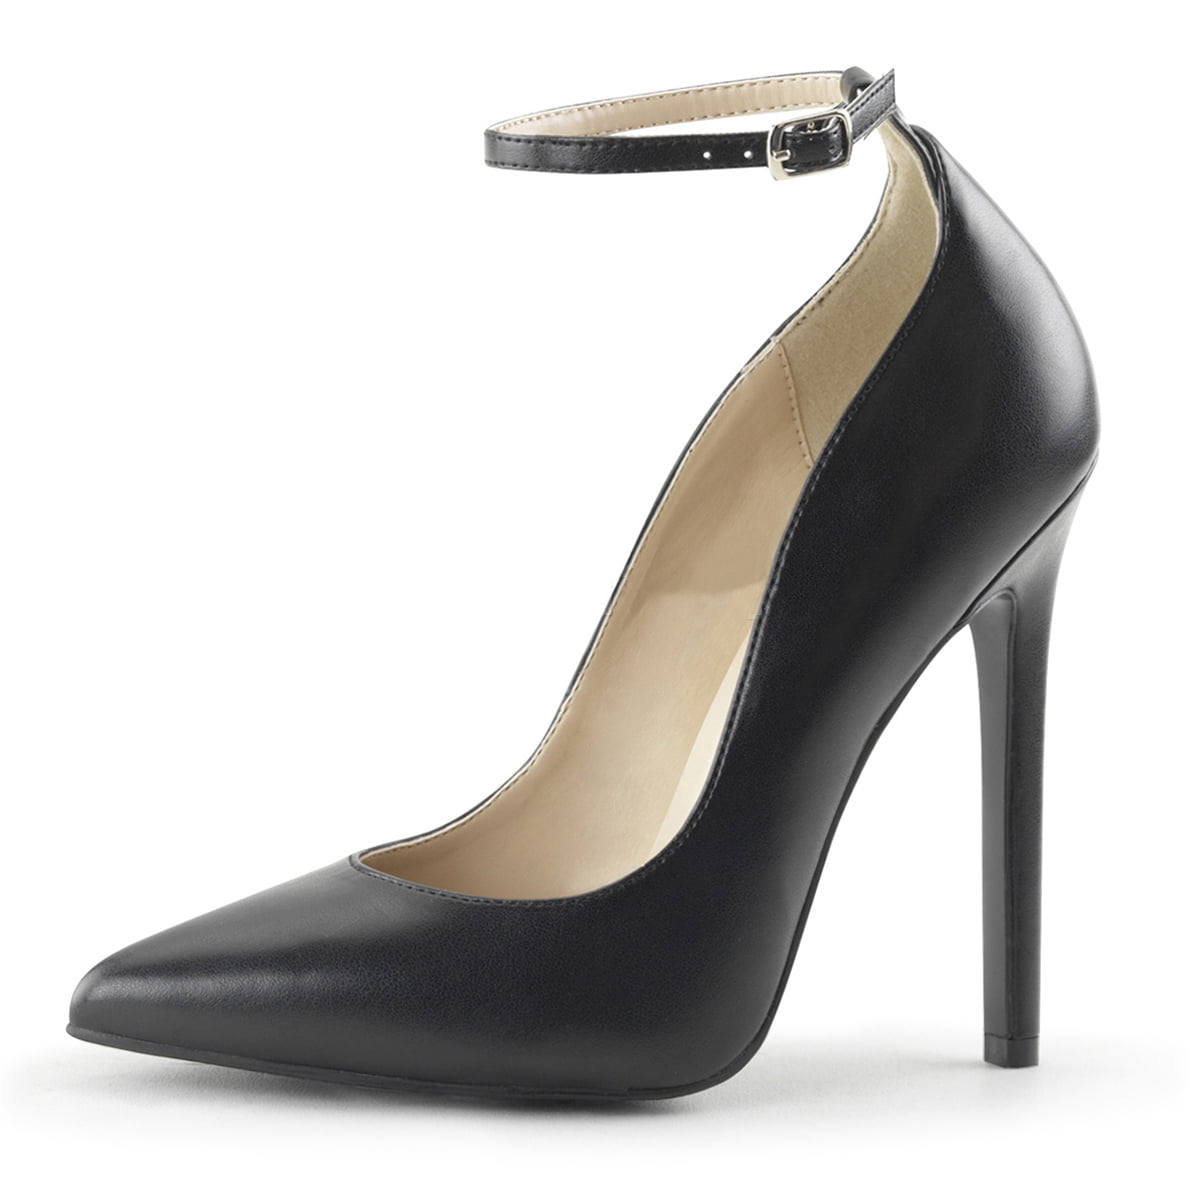 SummitFashions - Womens Black Ankle Strap Heels Pointed Toe Pumps ...